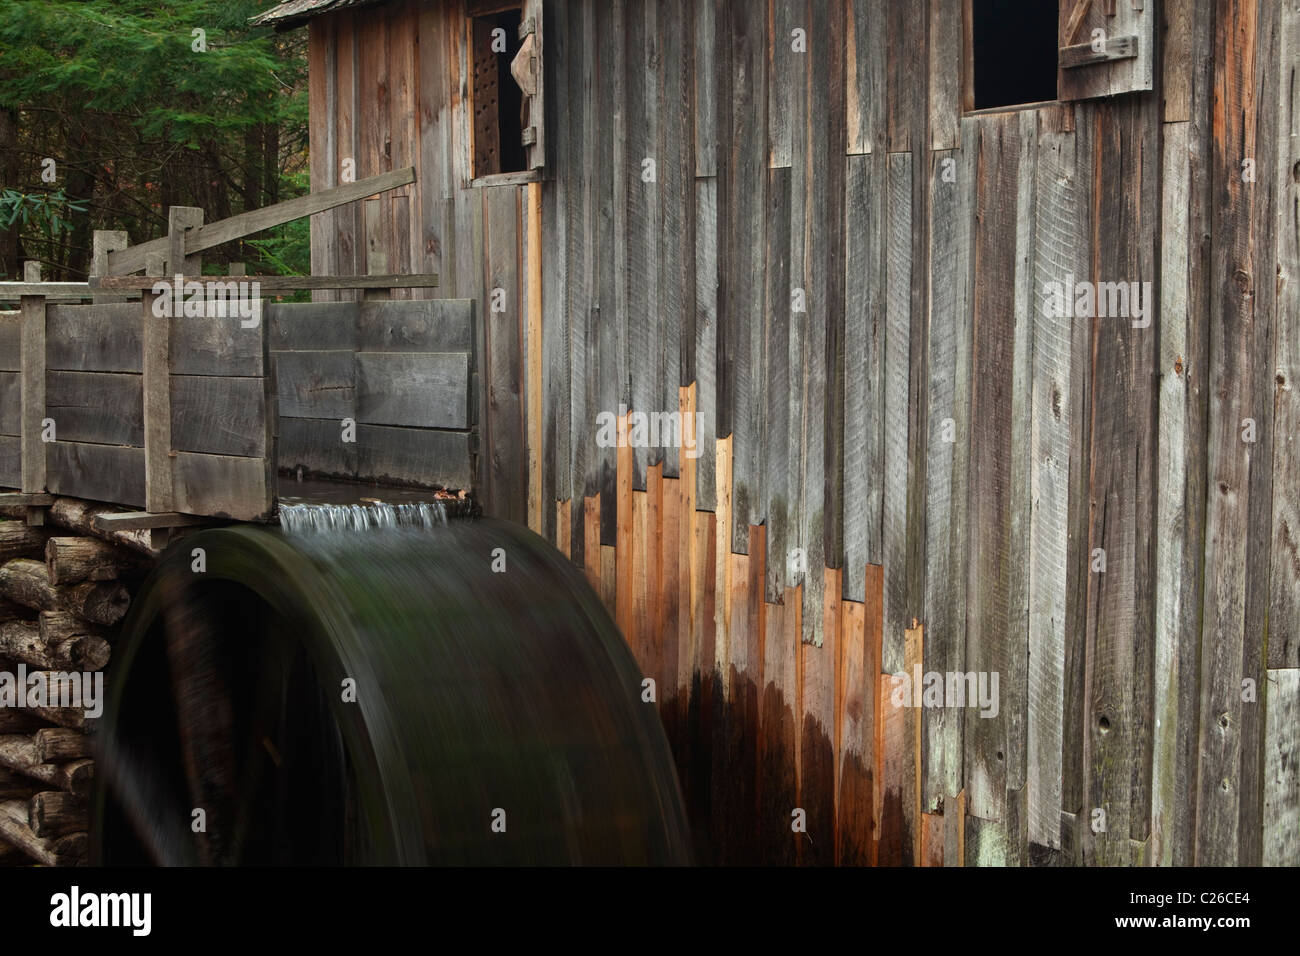 John Cable Grist Mill in the Great Smoky Mountain National Park. Stock Photo